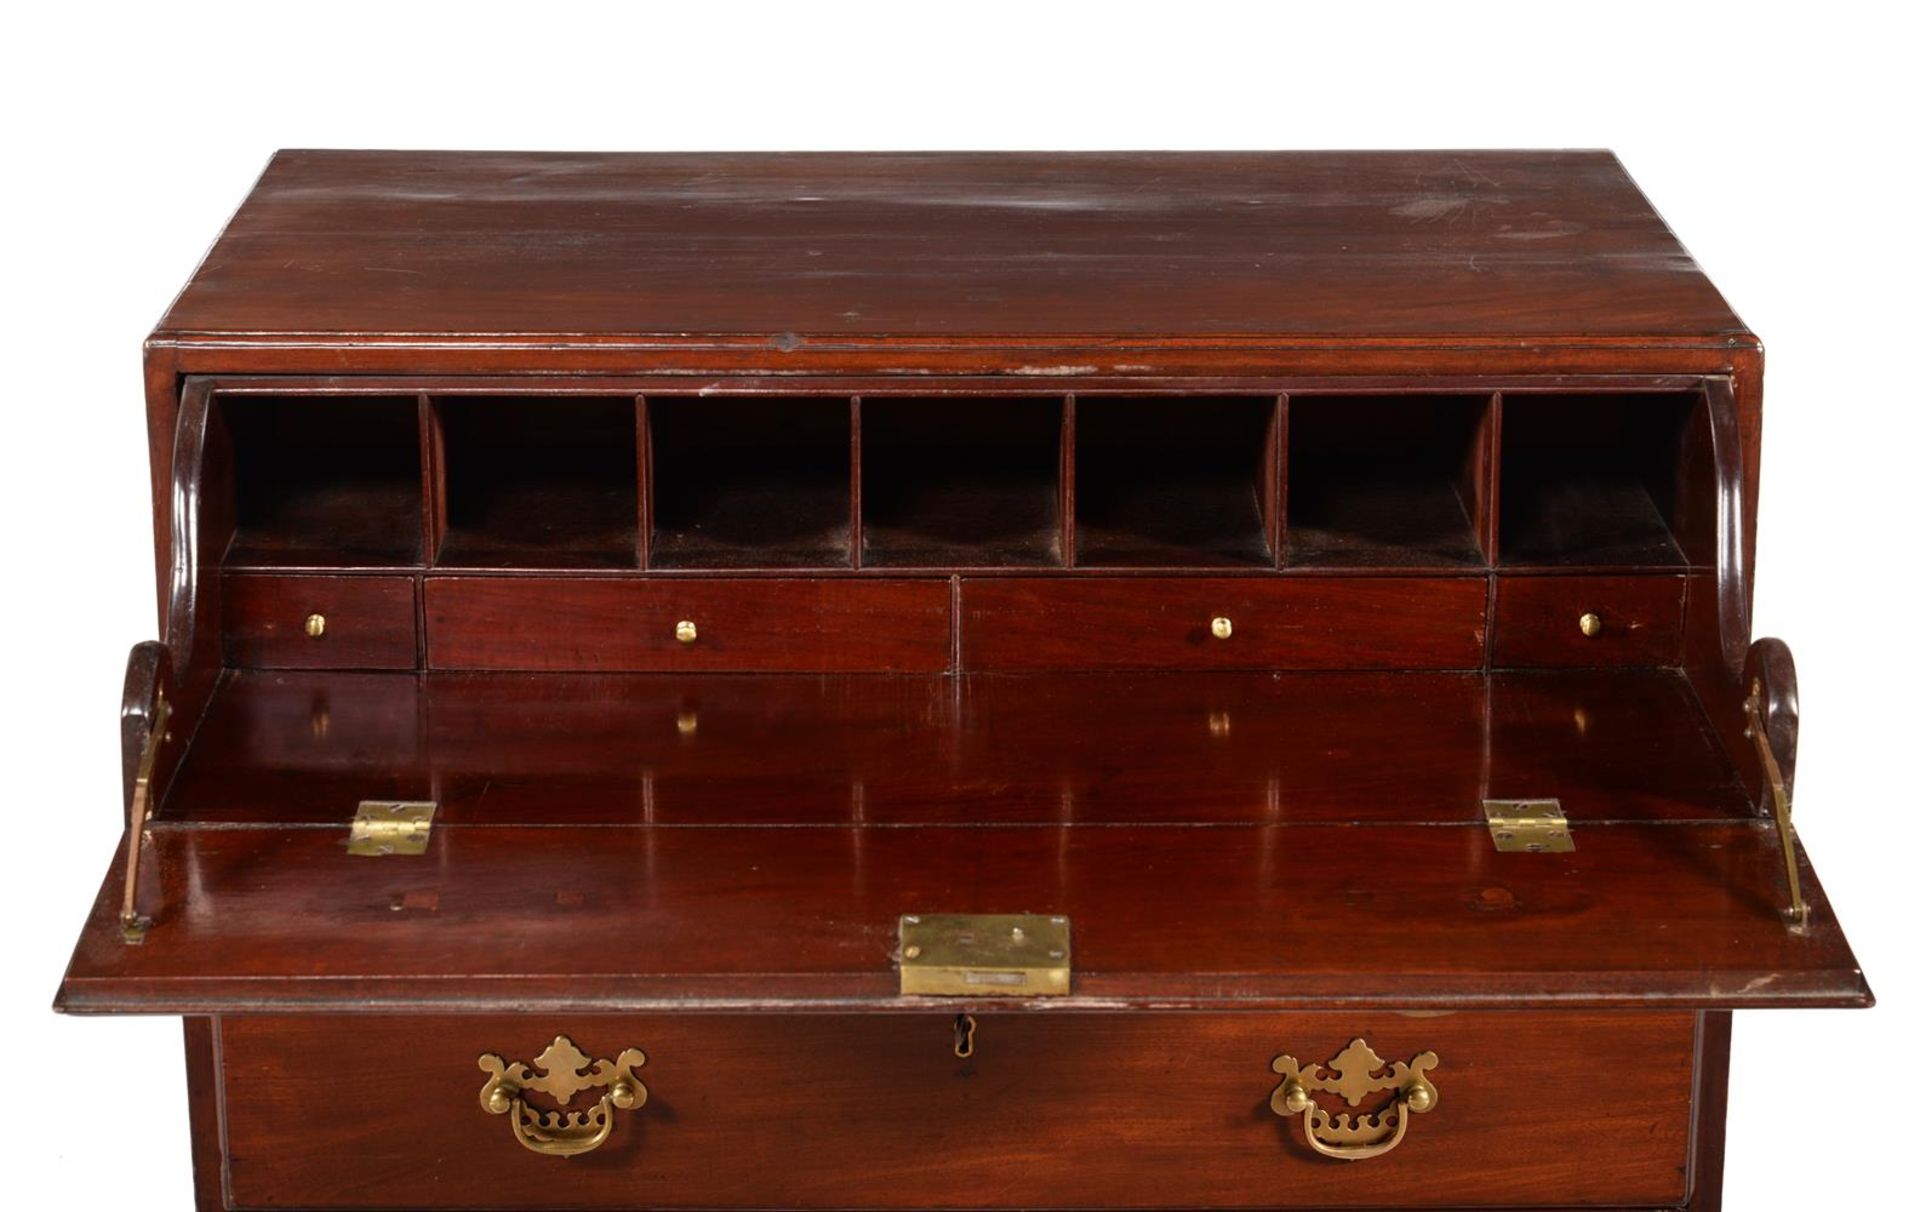 A GEORGE II MAHOGANY SECRETAIRE CHEST, MID-18TH CENTURY - Image 4 of 7